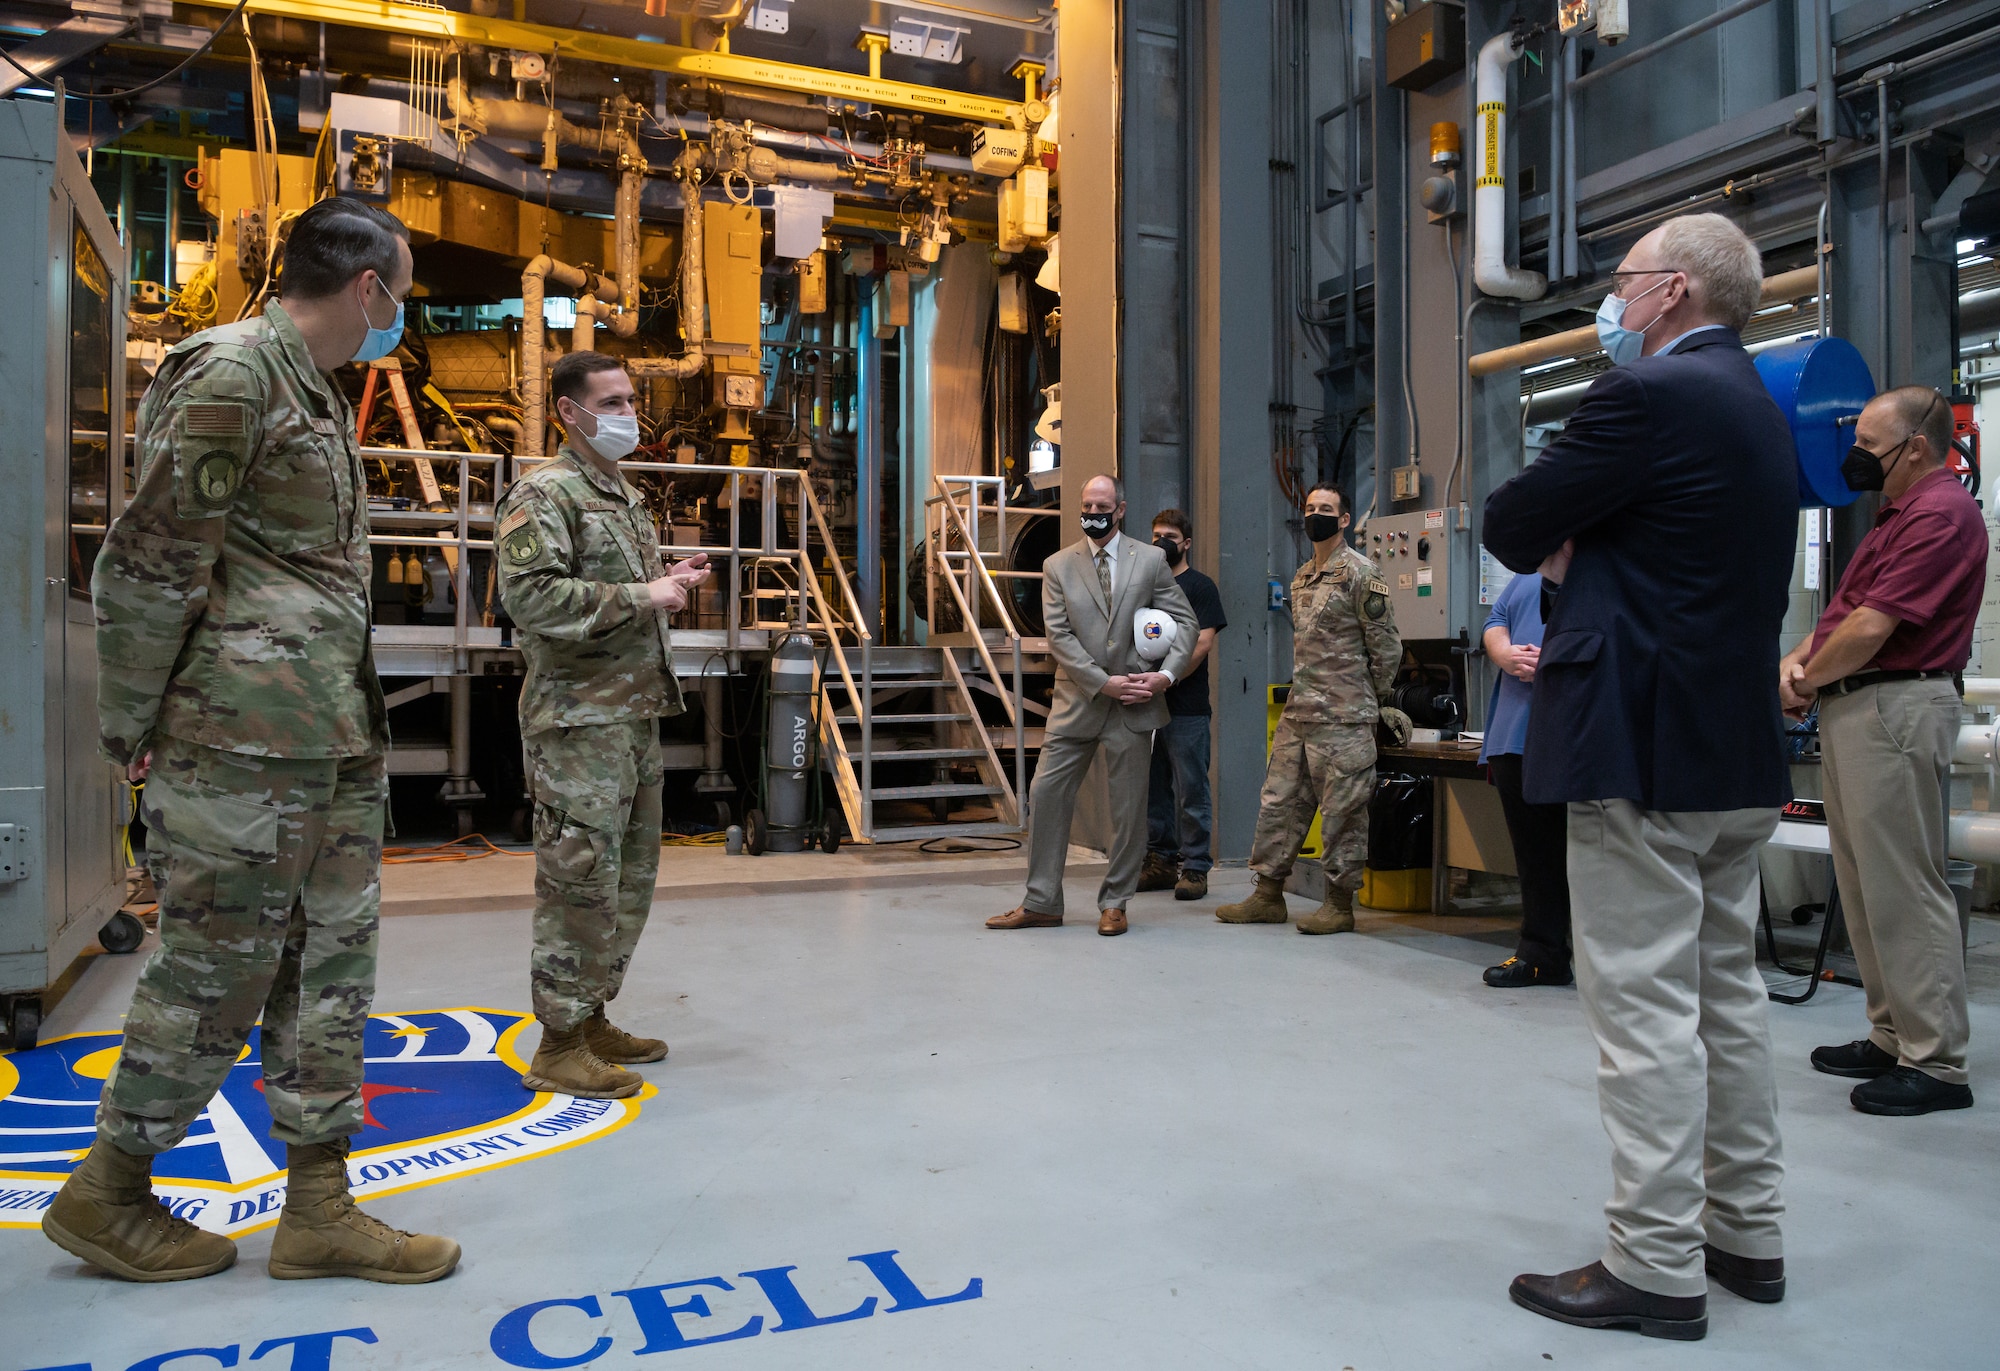 1st Lt. Adam Doyle, second from left, a test manager in the Propulsion Test Branch, Test Division, Arnold Engineering Development Complex (AEDC), briefs Rep. John Rose, of Tennessee, about the engine testing conducted using the Sea Level Test Cell 3 (SL-3) as they tour the facility during the representative's visit to Arnold Air Force Base, Tenn., headquarters of AEDC, Aug. 31, 2021. An F135, the engine that powers the F-35 Joint Strike Fighter, is currently installed in SL-3 for accelerated mission testing. (U.S. Air Force photo by Jill Pickett)